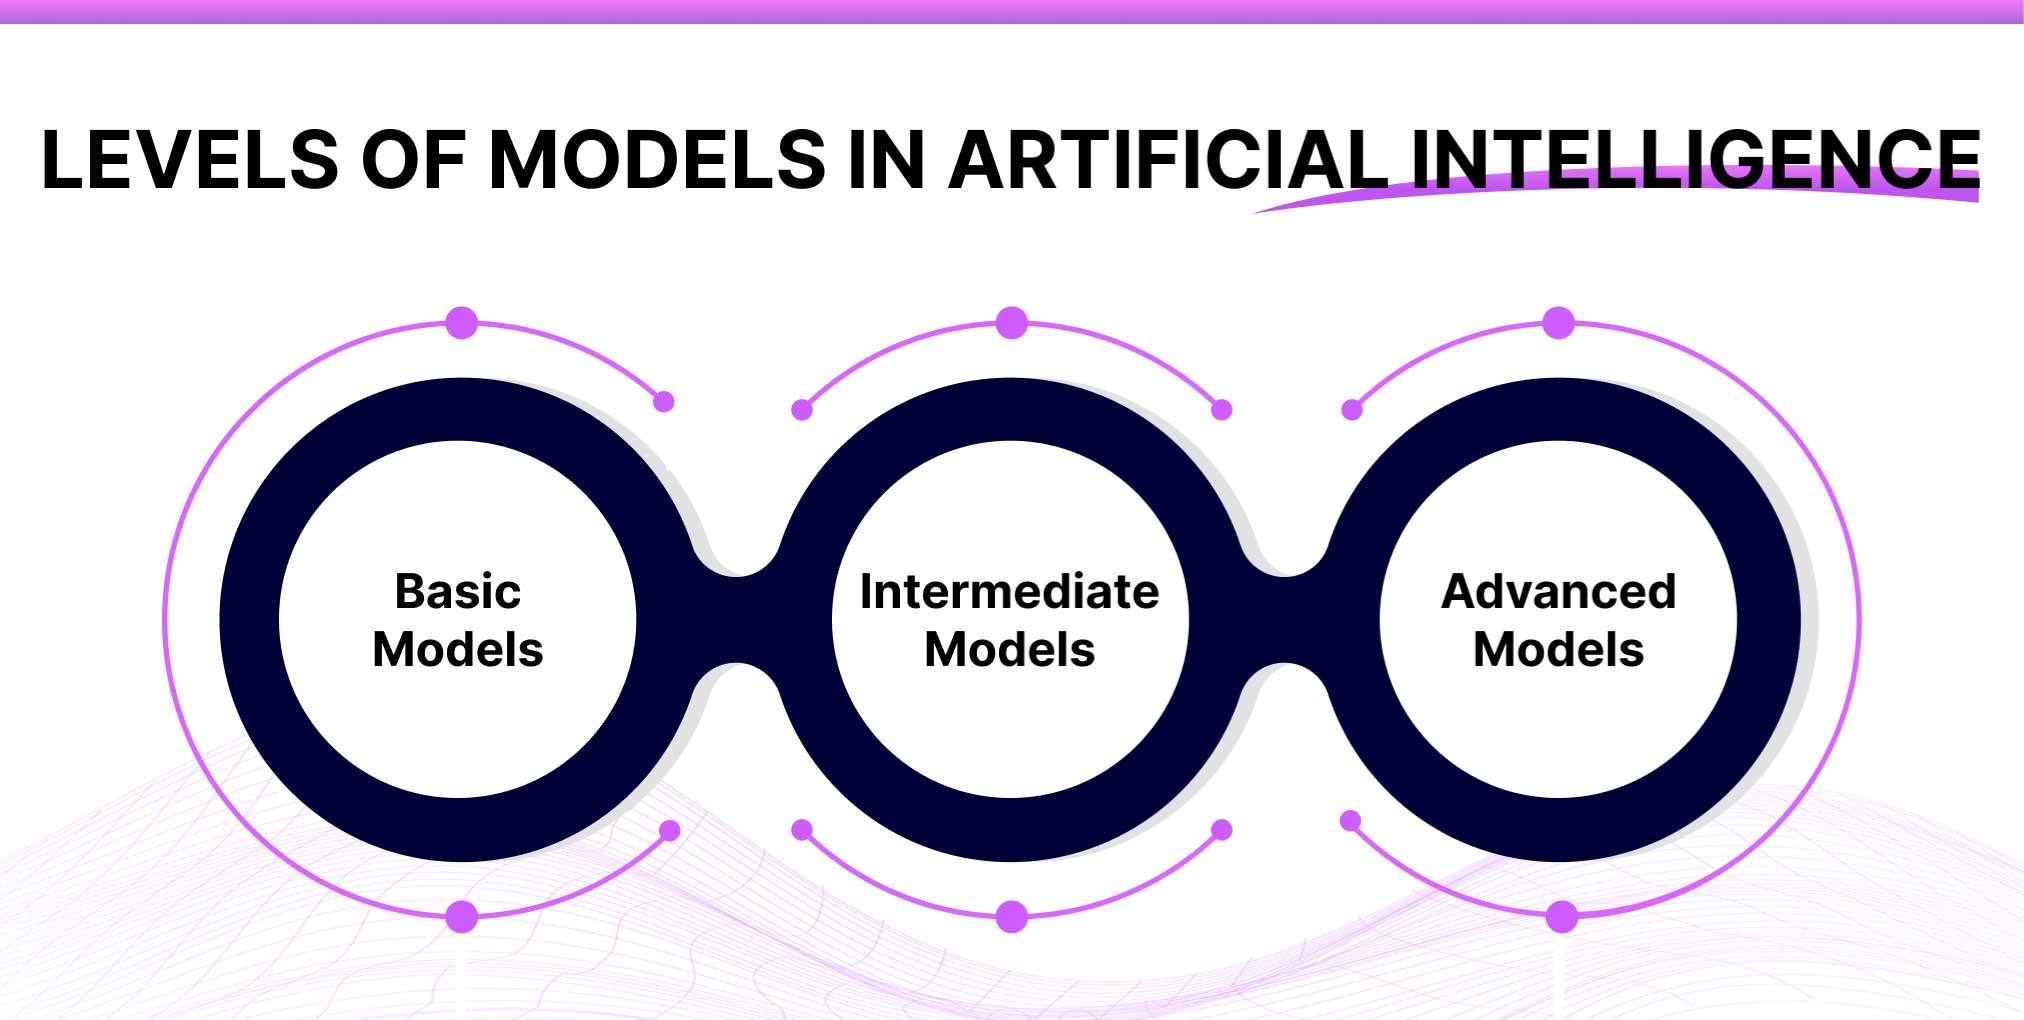 Levels of Models in Artificial Intelligence
